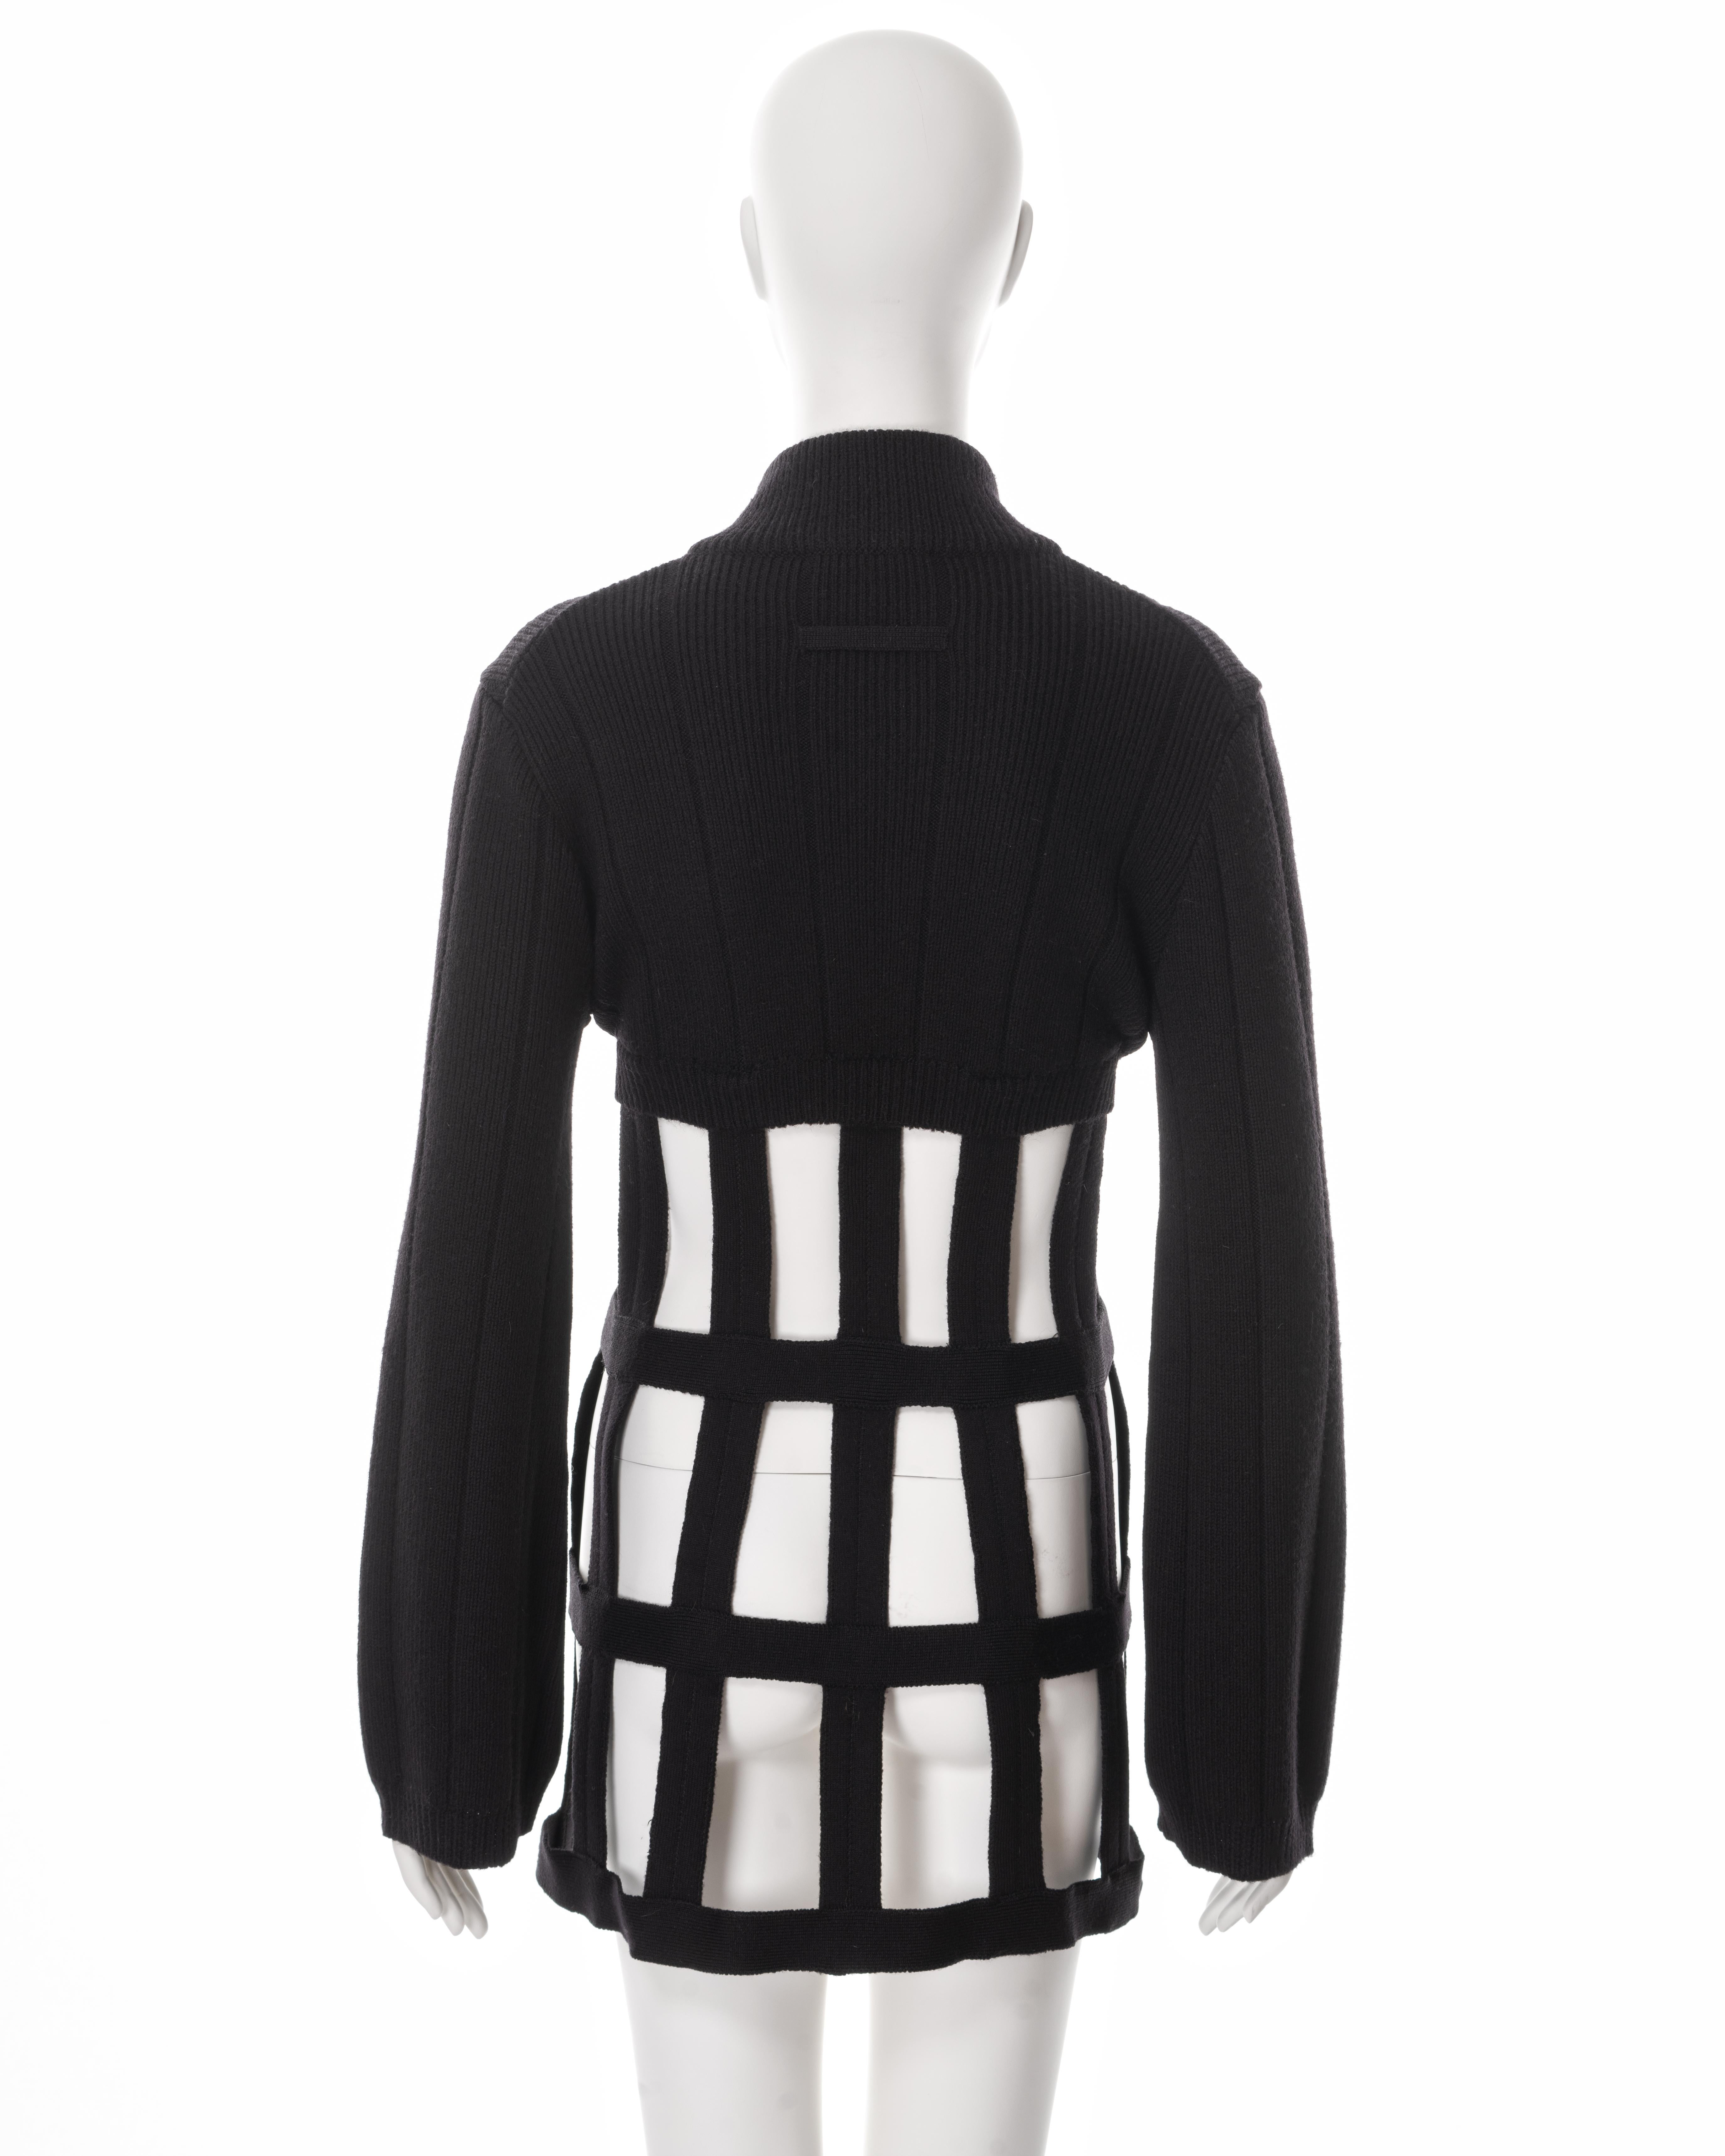 Jean Paul Gaultier black knitted wool caged corset sweater dress, fw 1989 For Sale 5